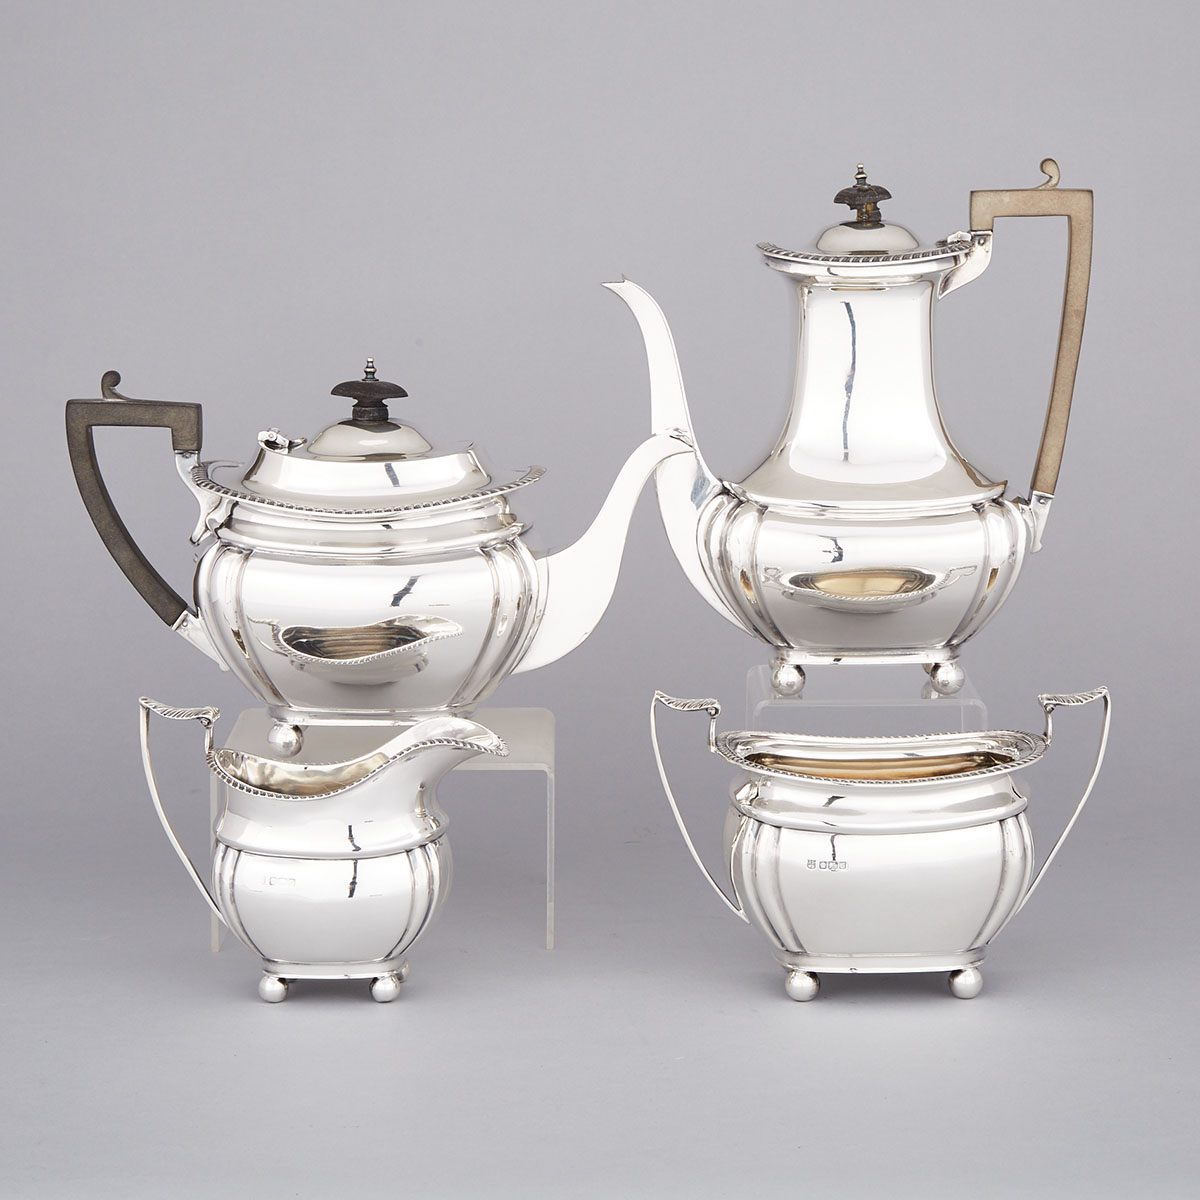 English Silver Tea and Coffee Service, James Deakin & Sons, Sheffield, 1909-13